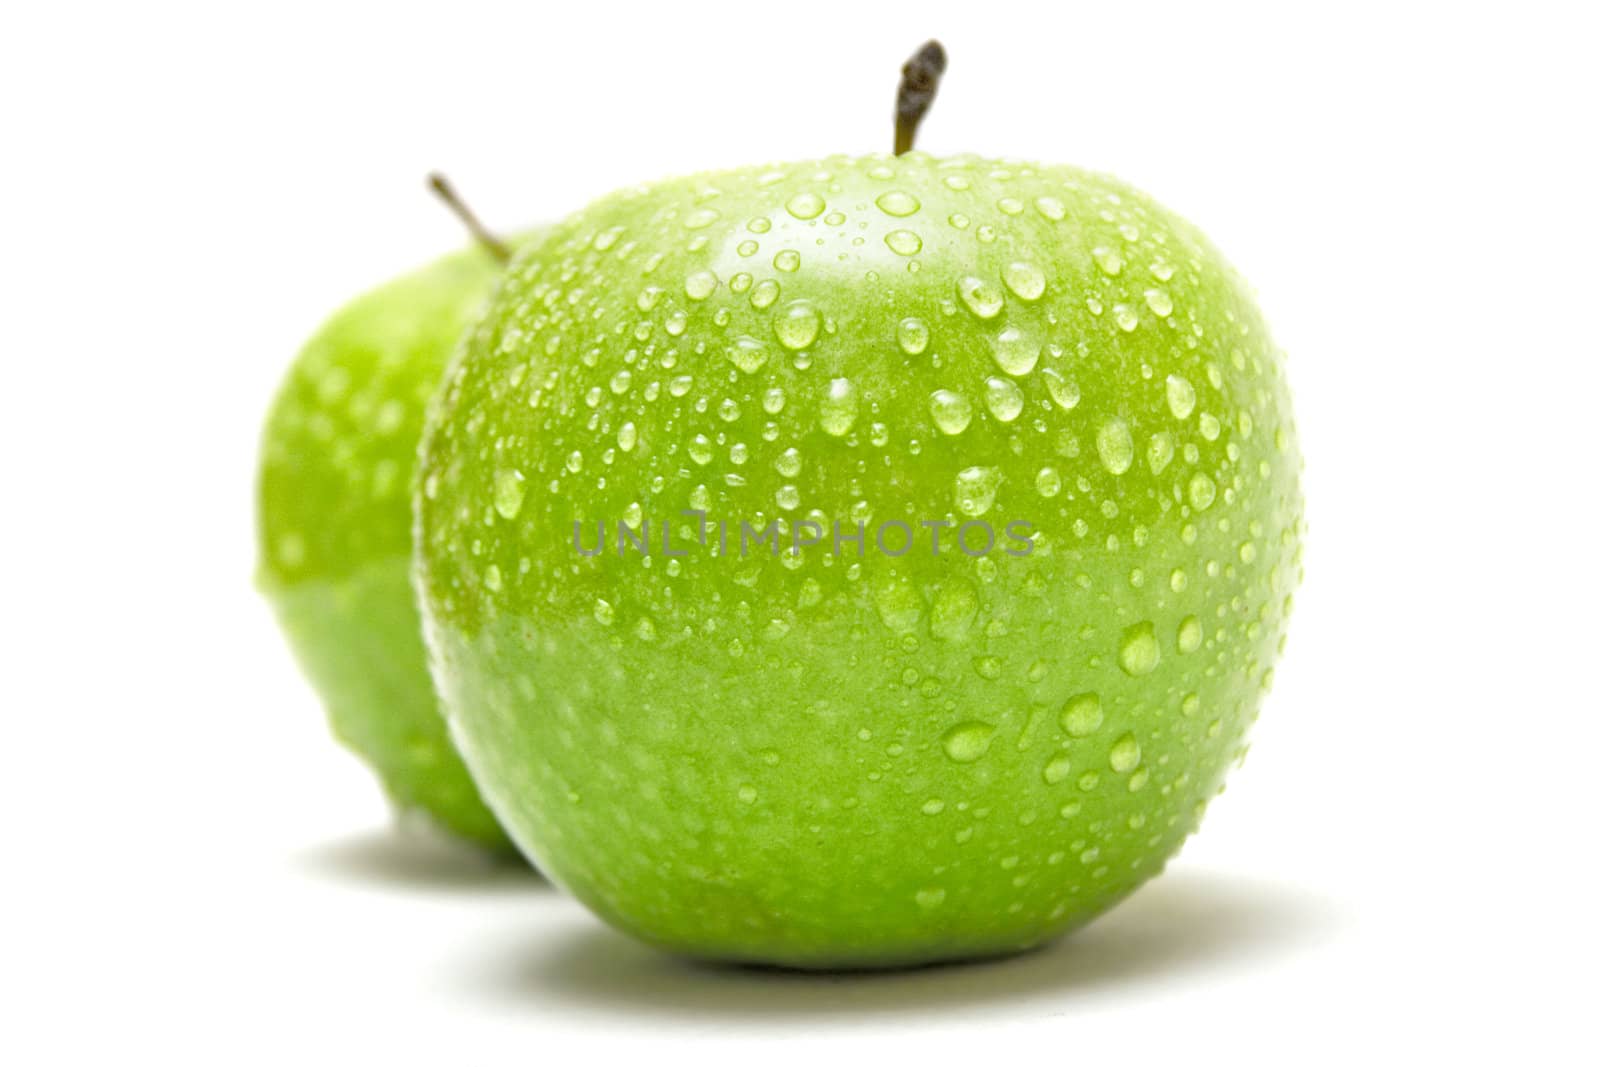 Two Green Apples with Water Drops by winterling